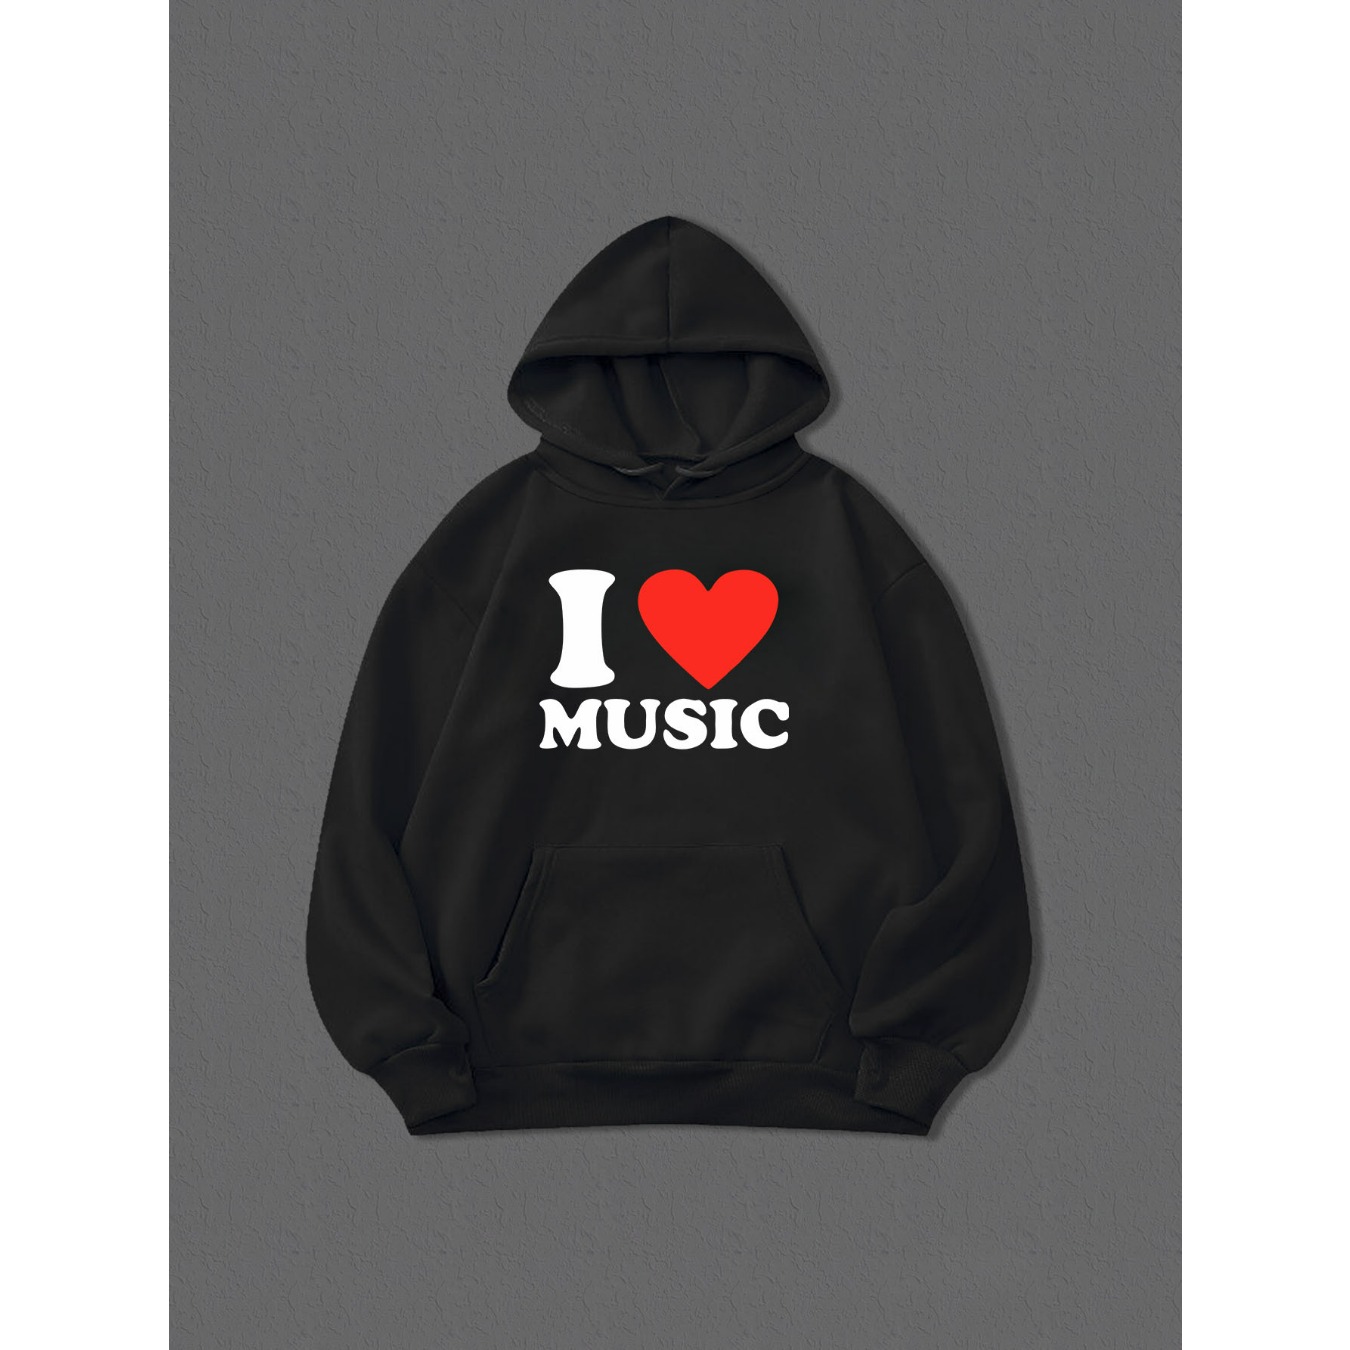 

I Love Music Print Hoodie, Cool Hoodies For Men, Men's Casual Graphic Design Pullover Hooded Sweatshirt With Kangaroo Pocket Streetwear For Winter Fall, As Gifts